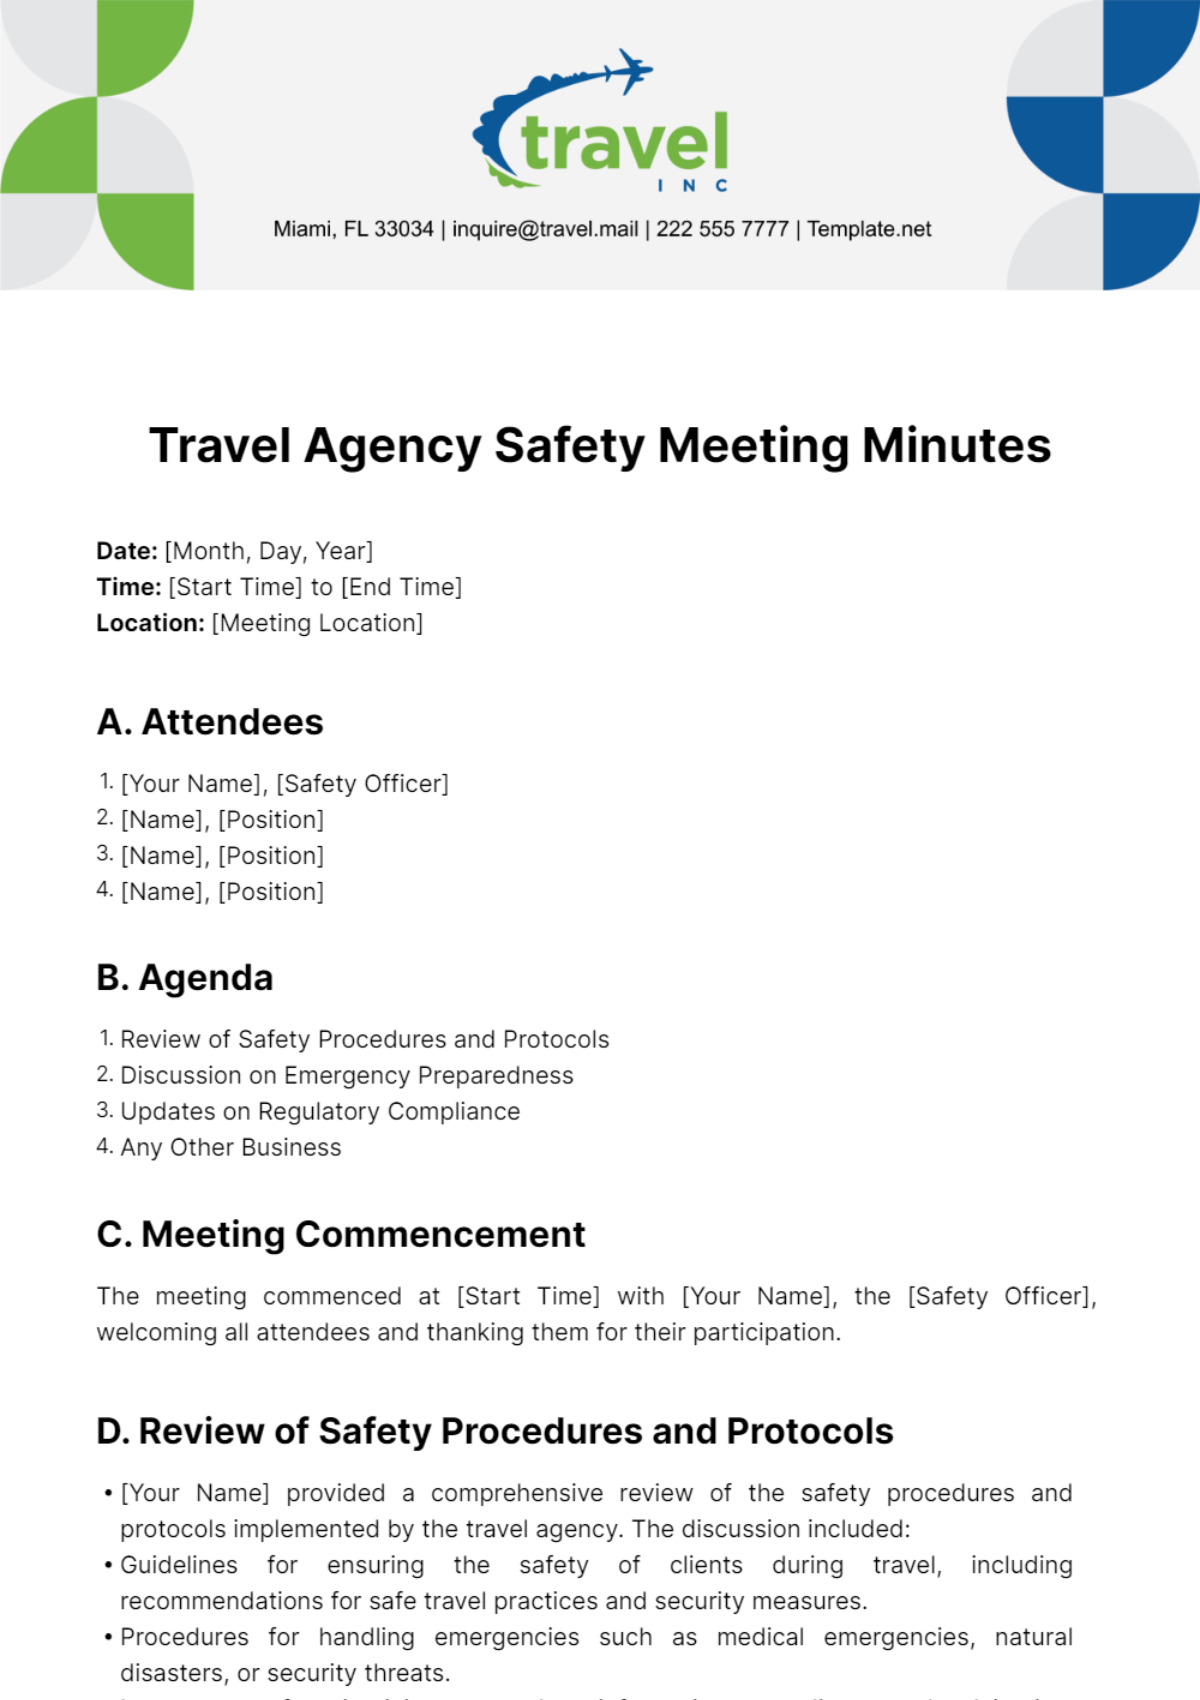 Travel Agency Safety Meeting Minutes Template